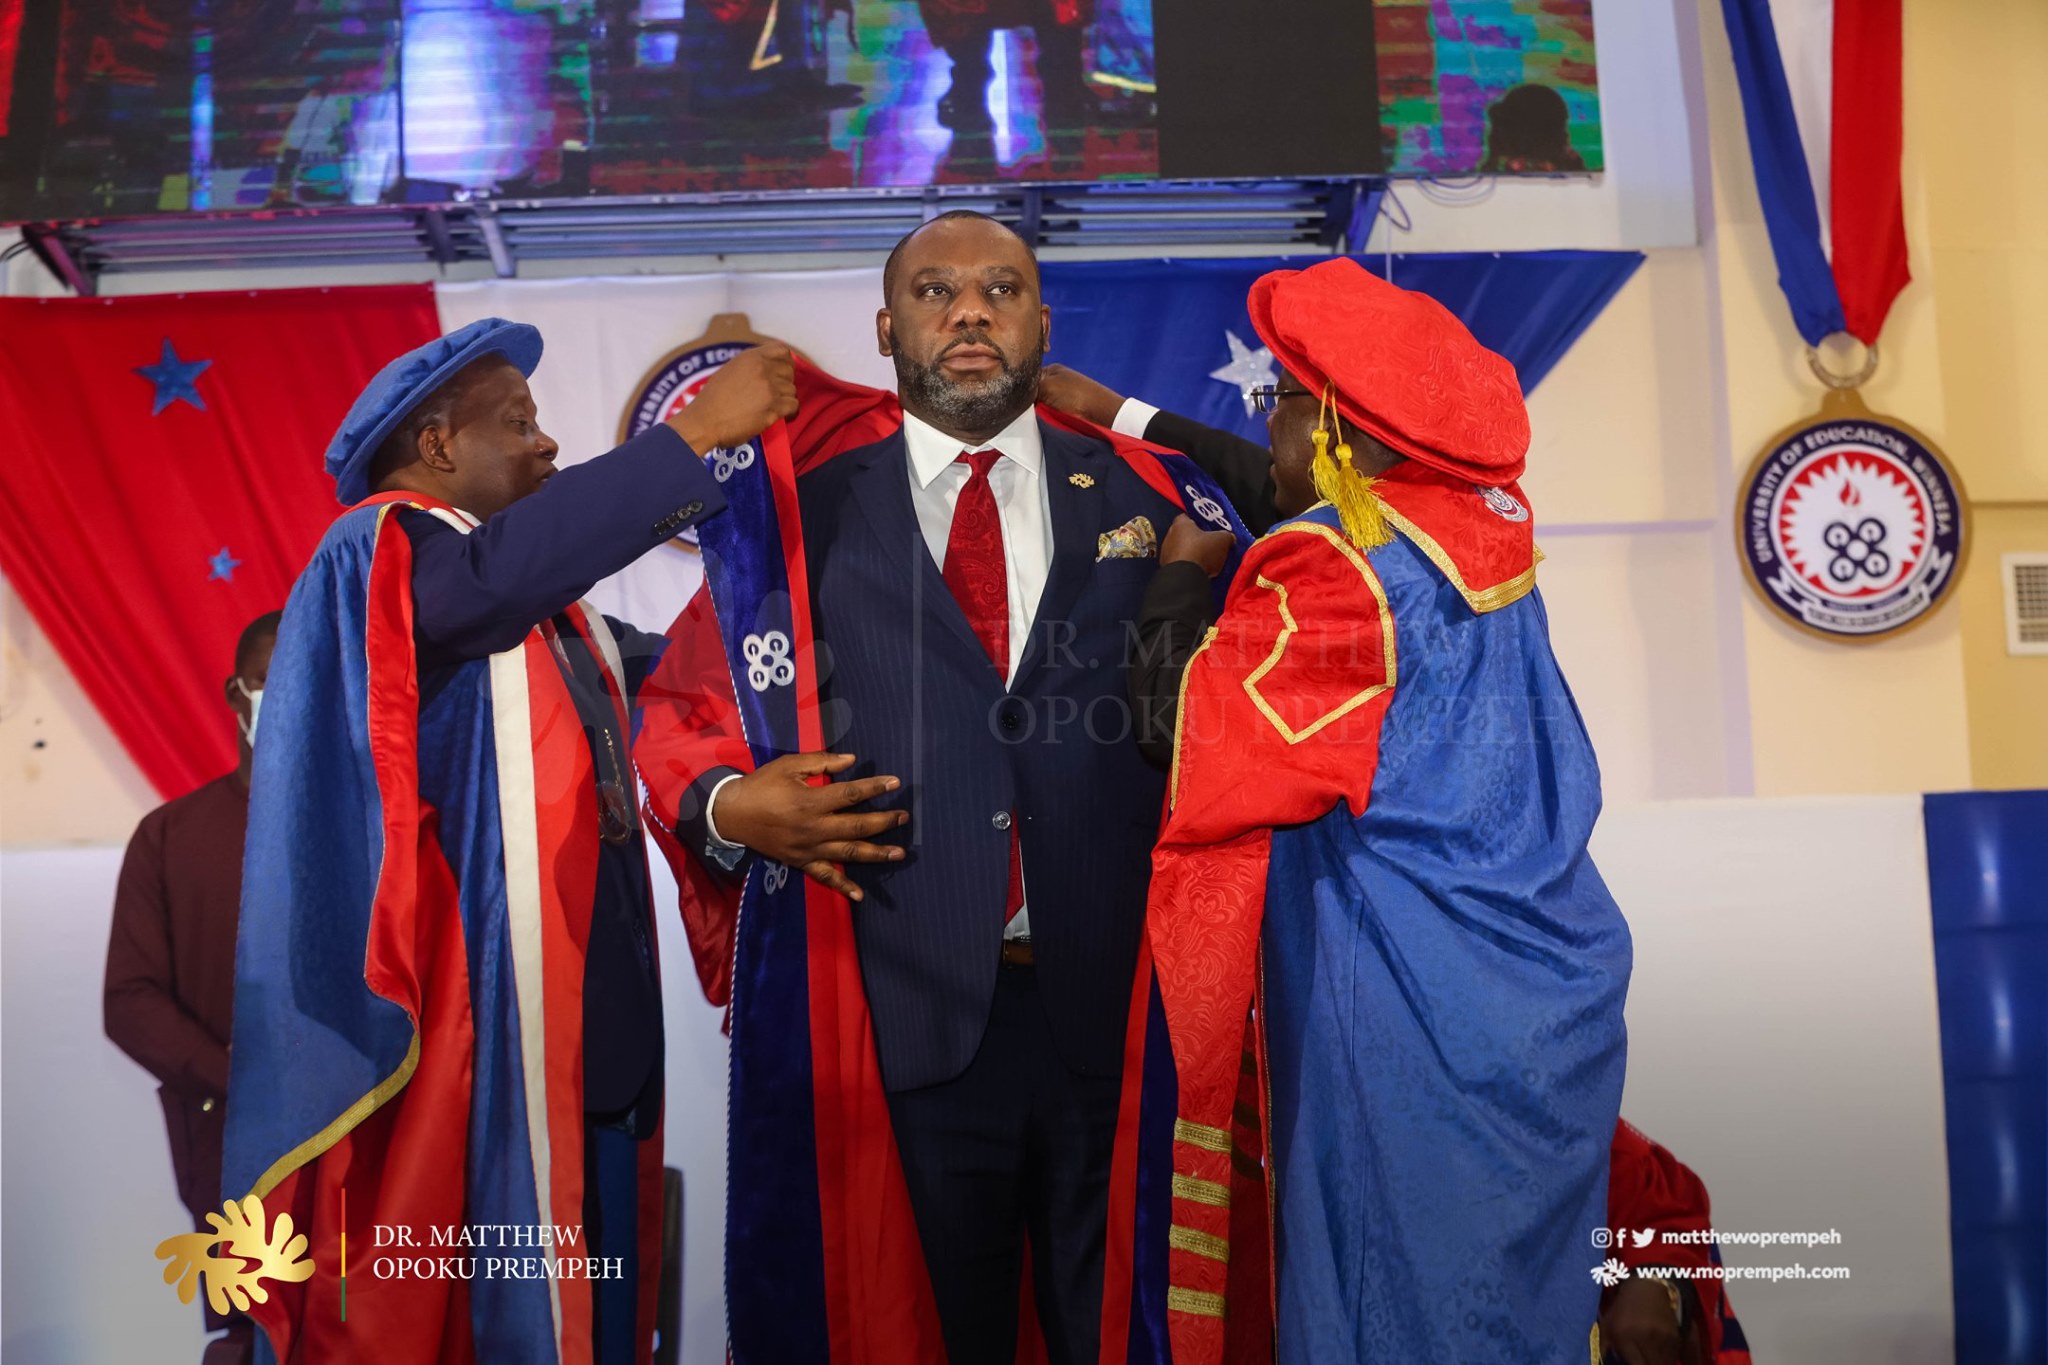 UEW confers doctorate degrees on Oquaye, Opoku Prempeh